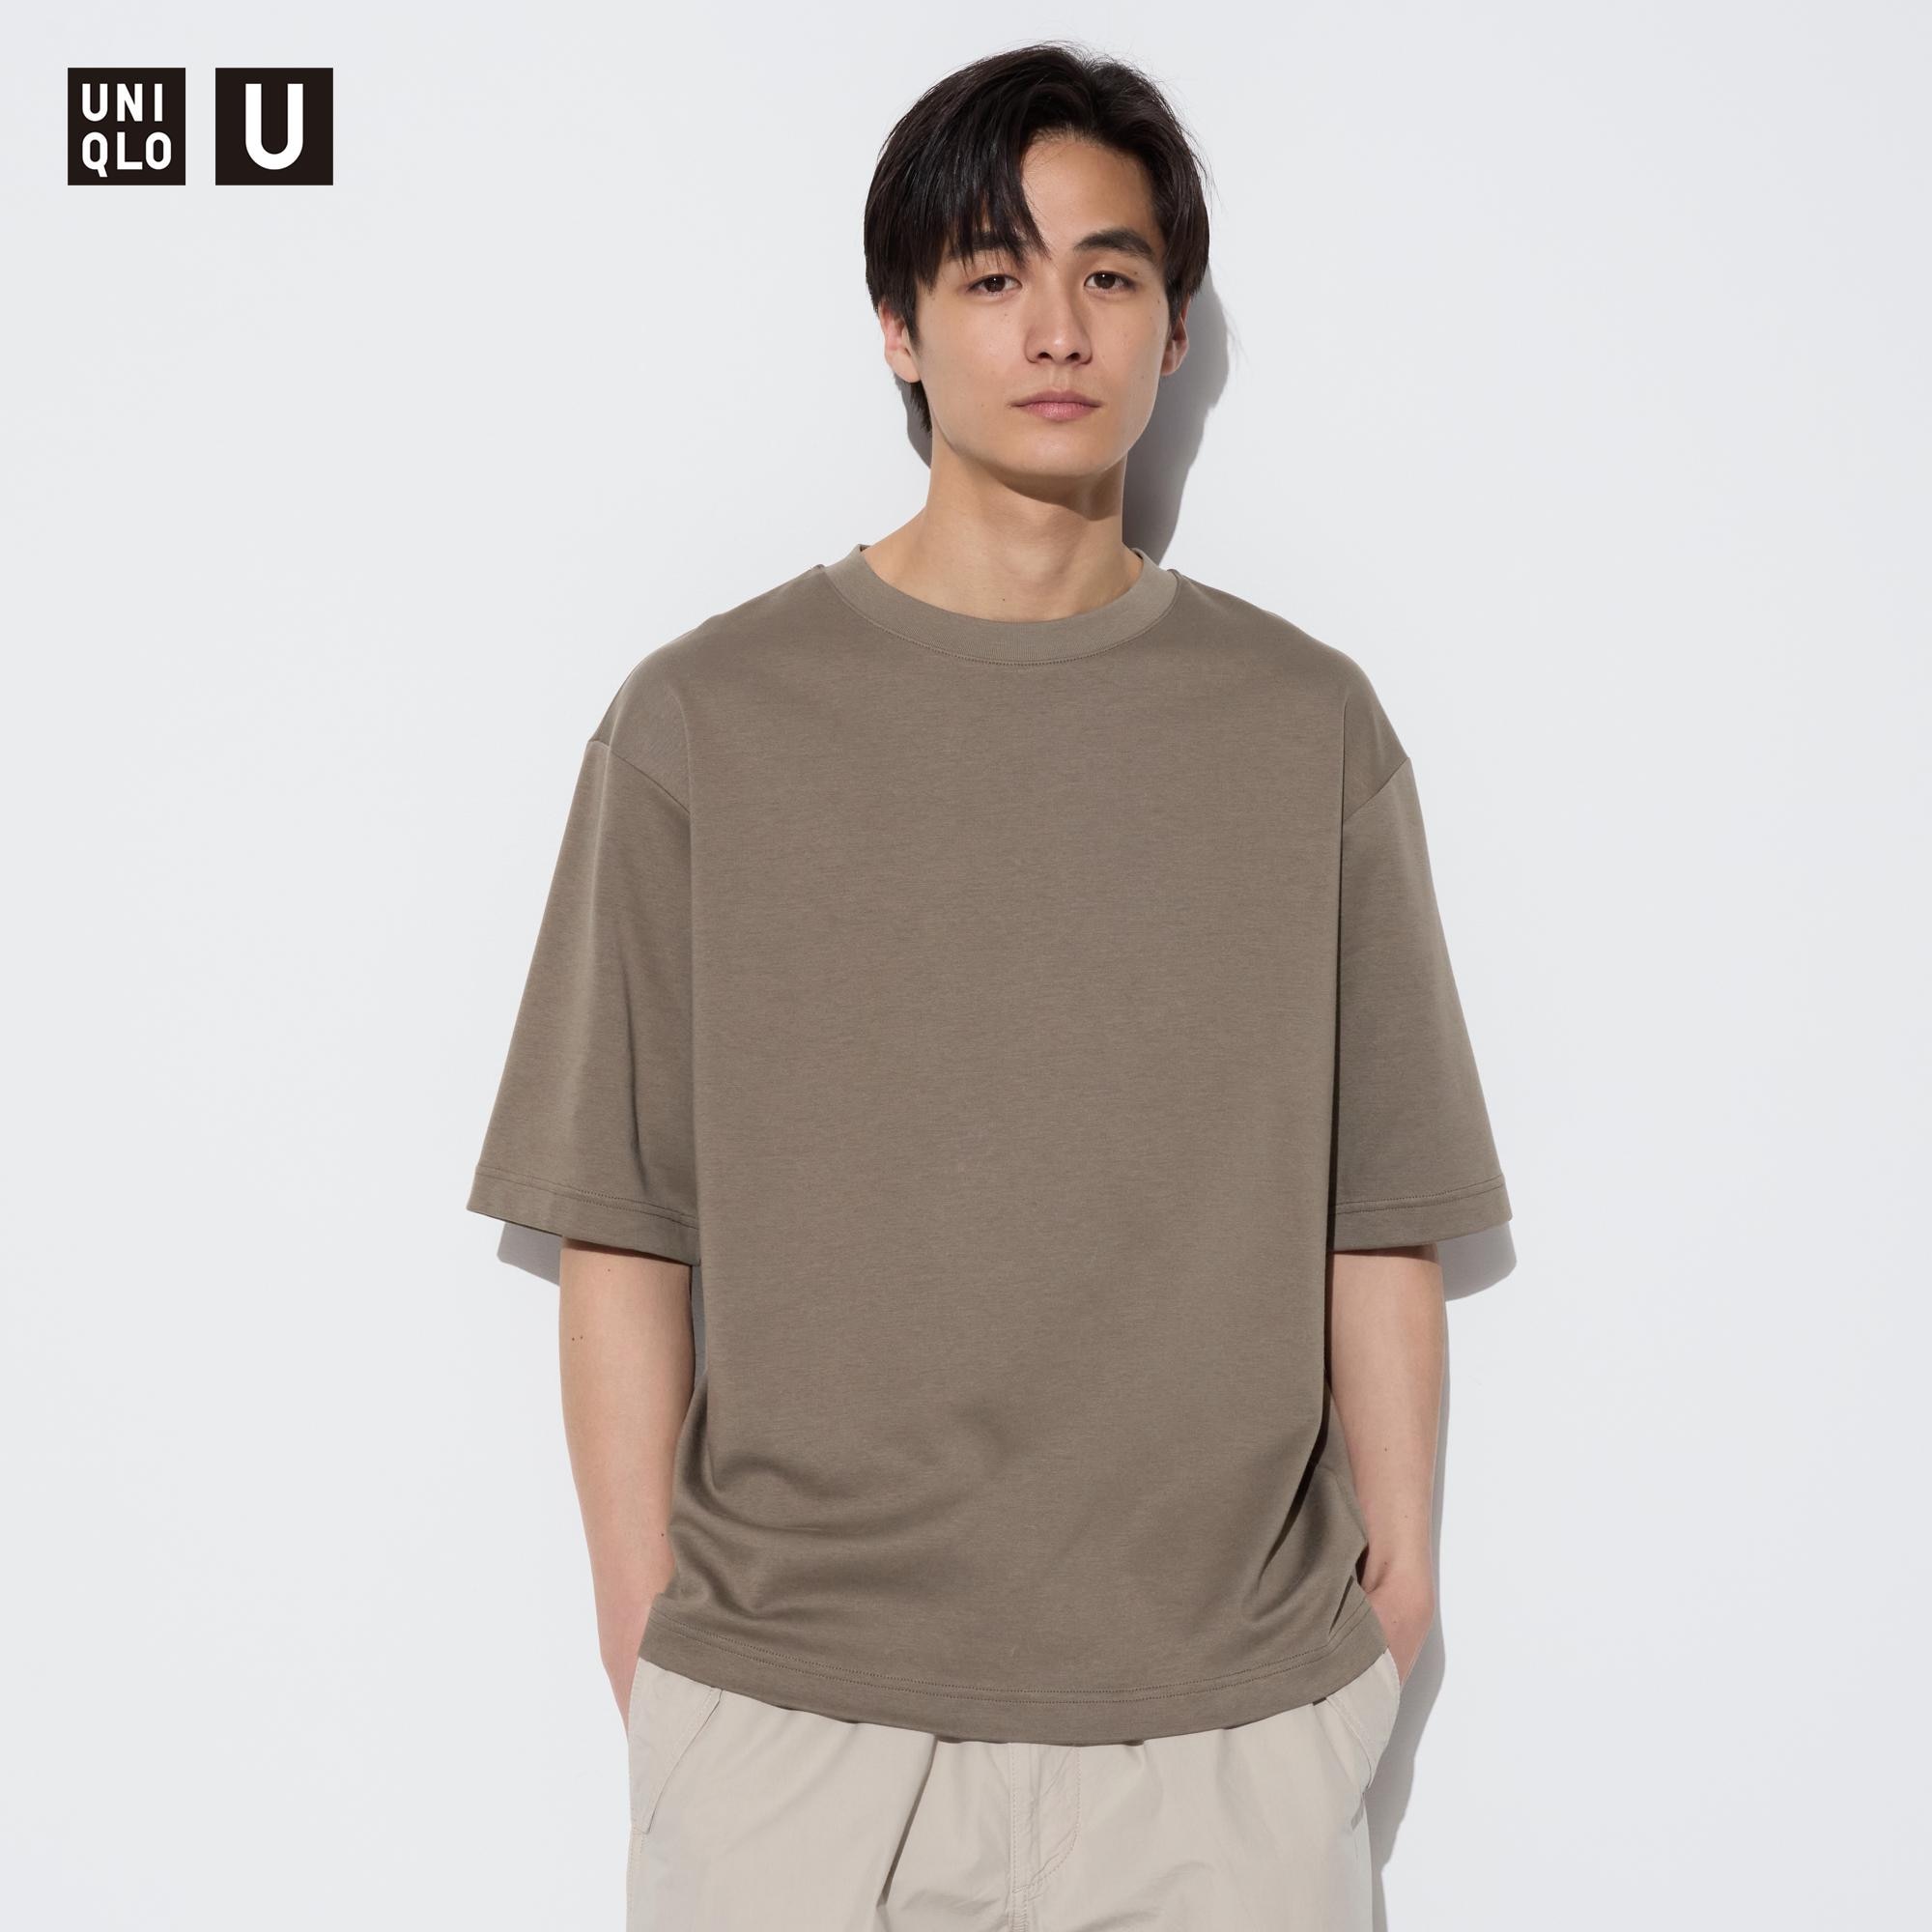 Chia sẻ 52 về uniqlo product categories  cdgdbentreeduvn